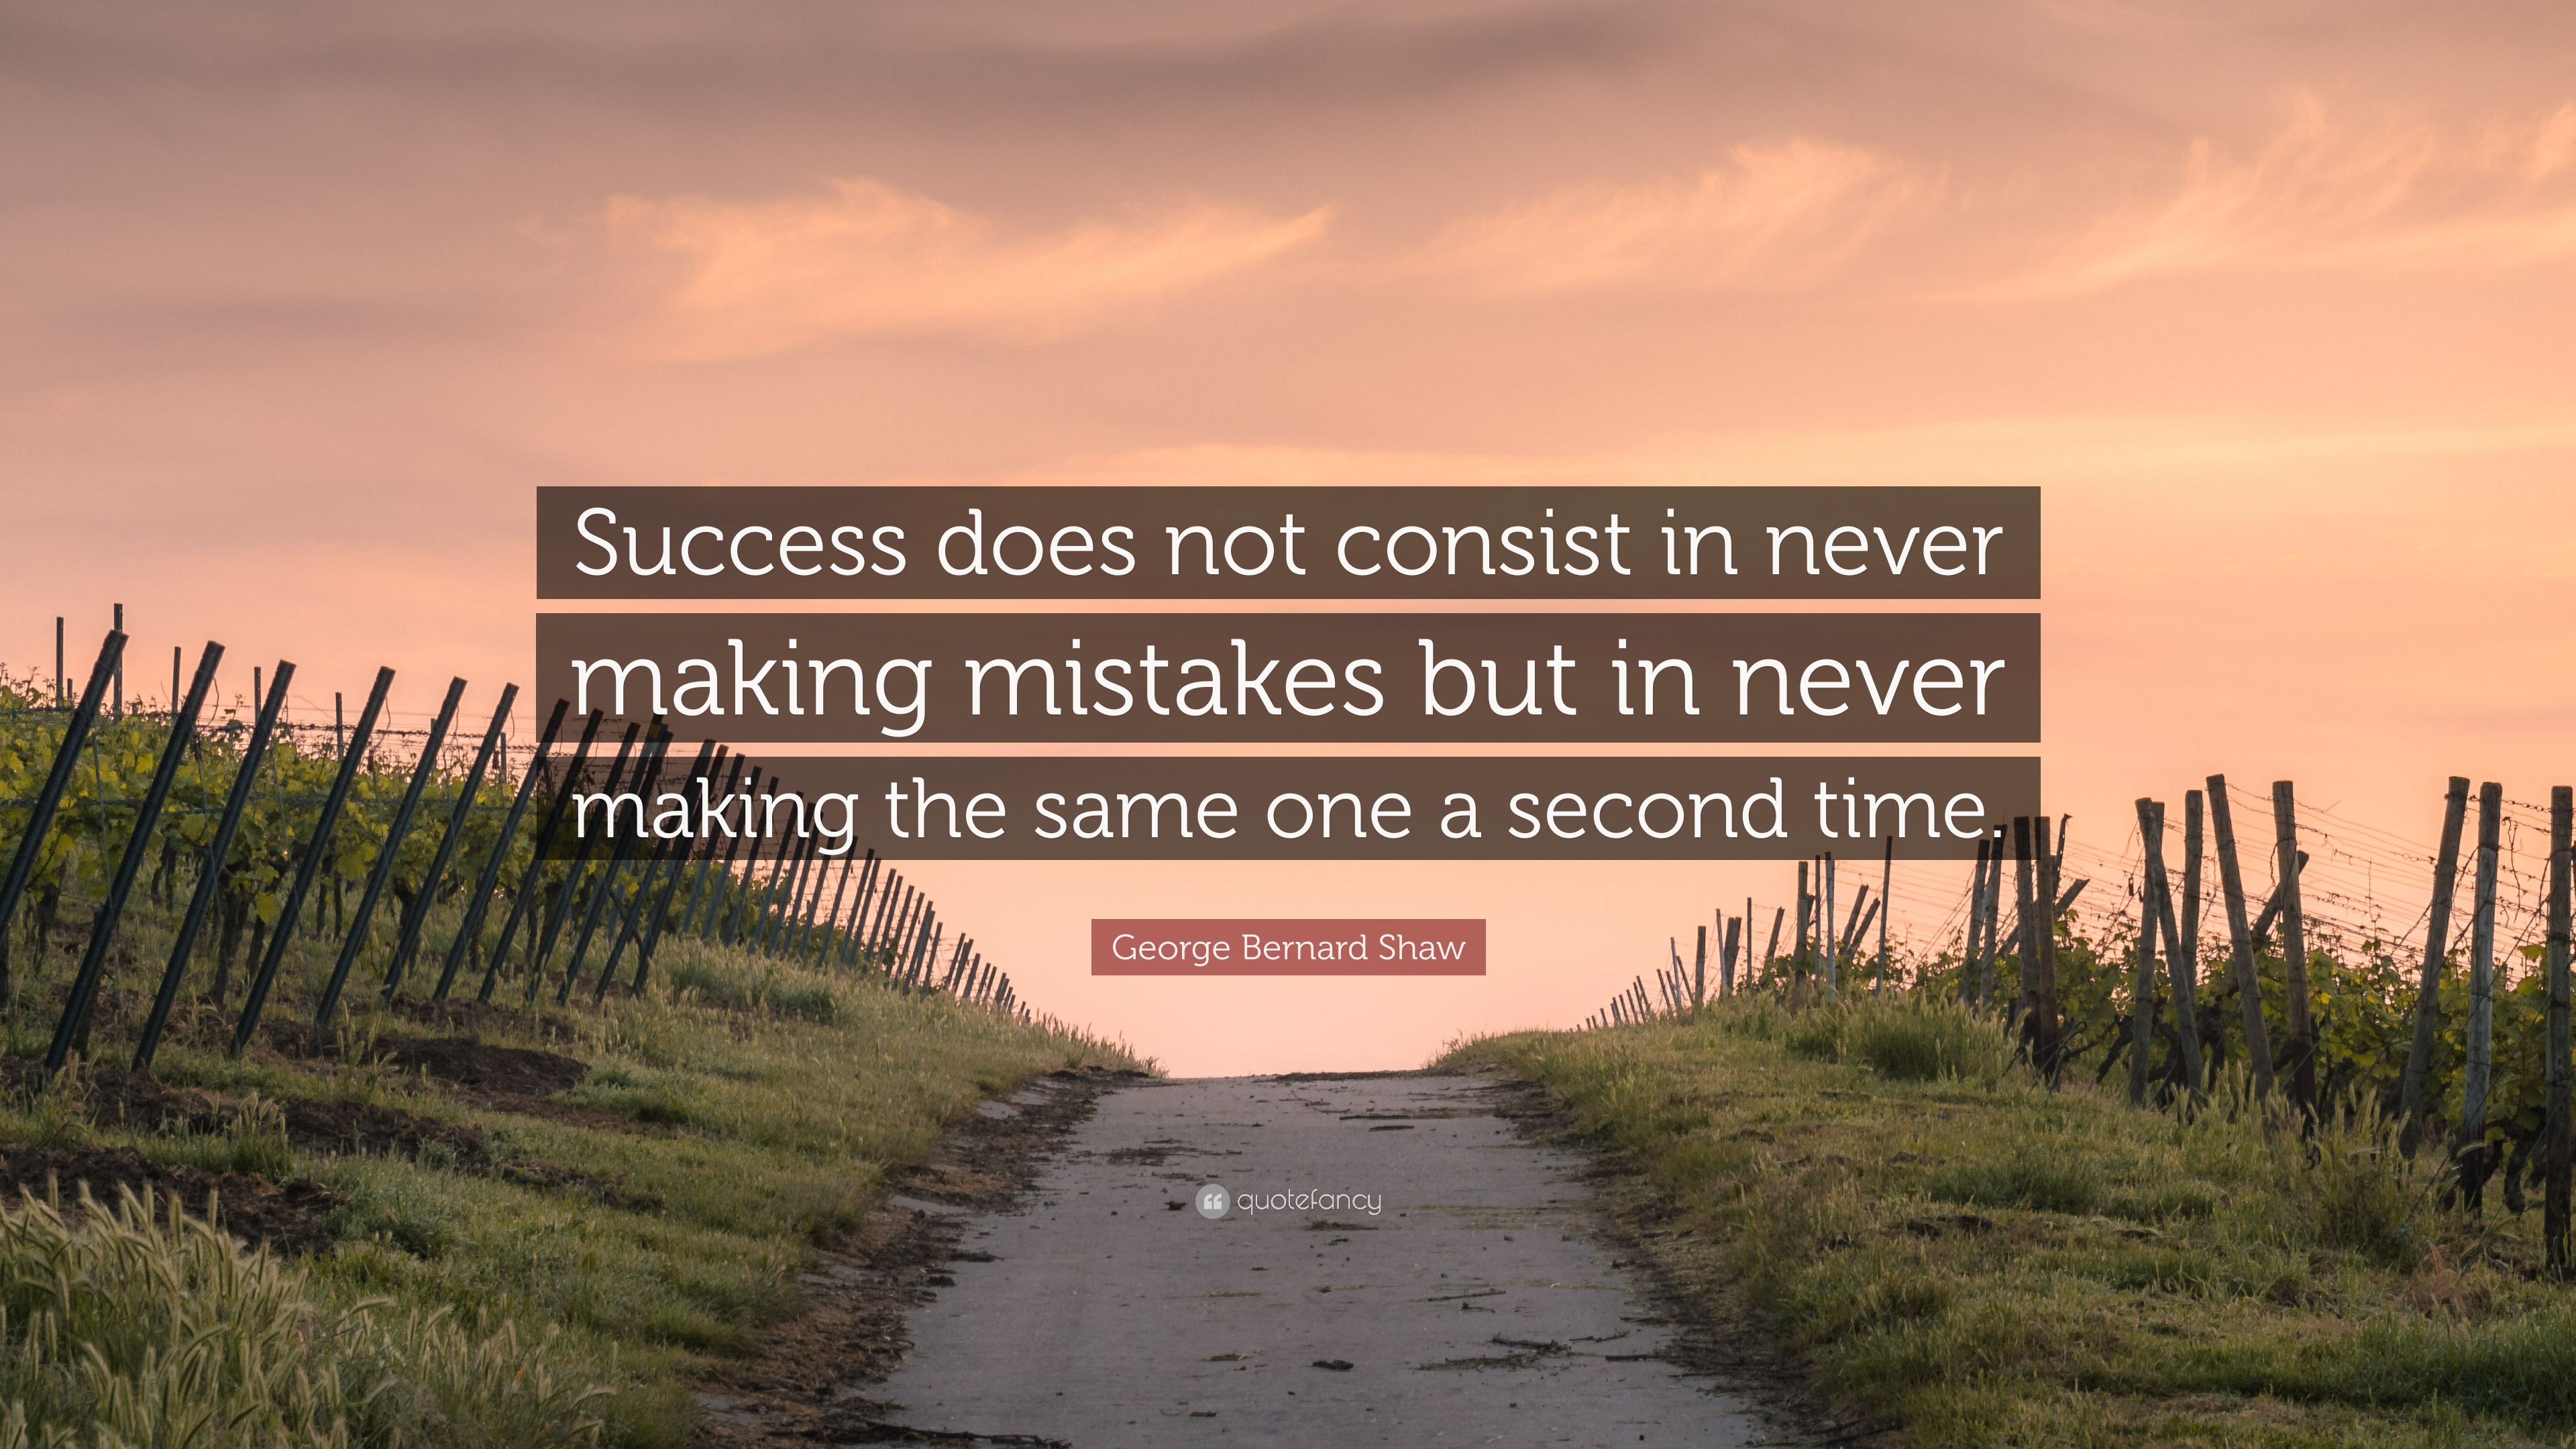 George Bernard Shaw Quote: “Success does not consist in never ...